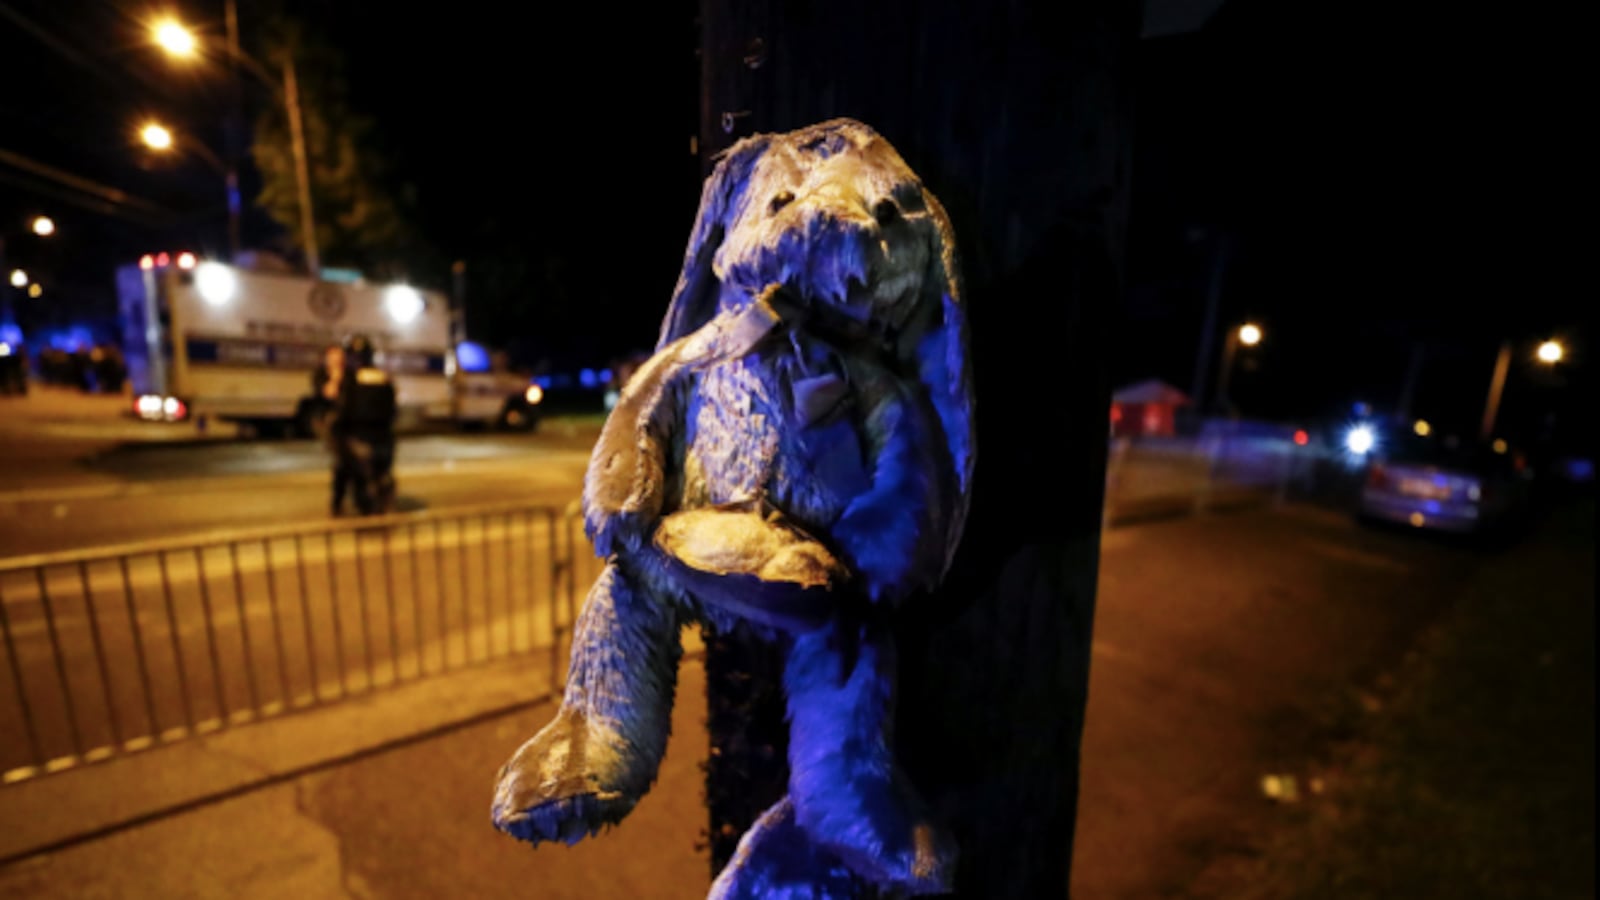 A soaked teddy bear hangs from a telephone pole near where protesters took to the streets of Frayser in the wake of an officer-involved shooting on Wednesday, June 12, 2019, that left one person dead.